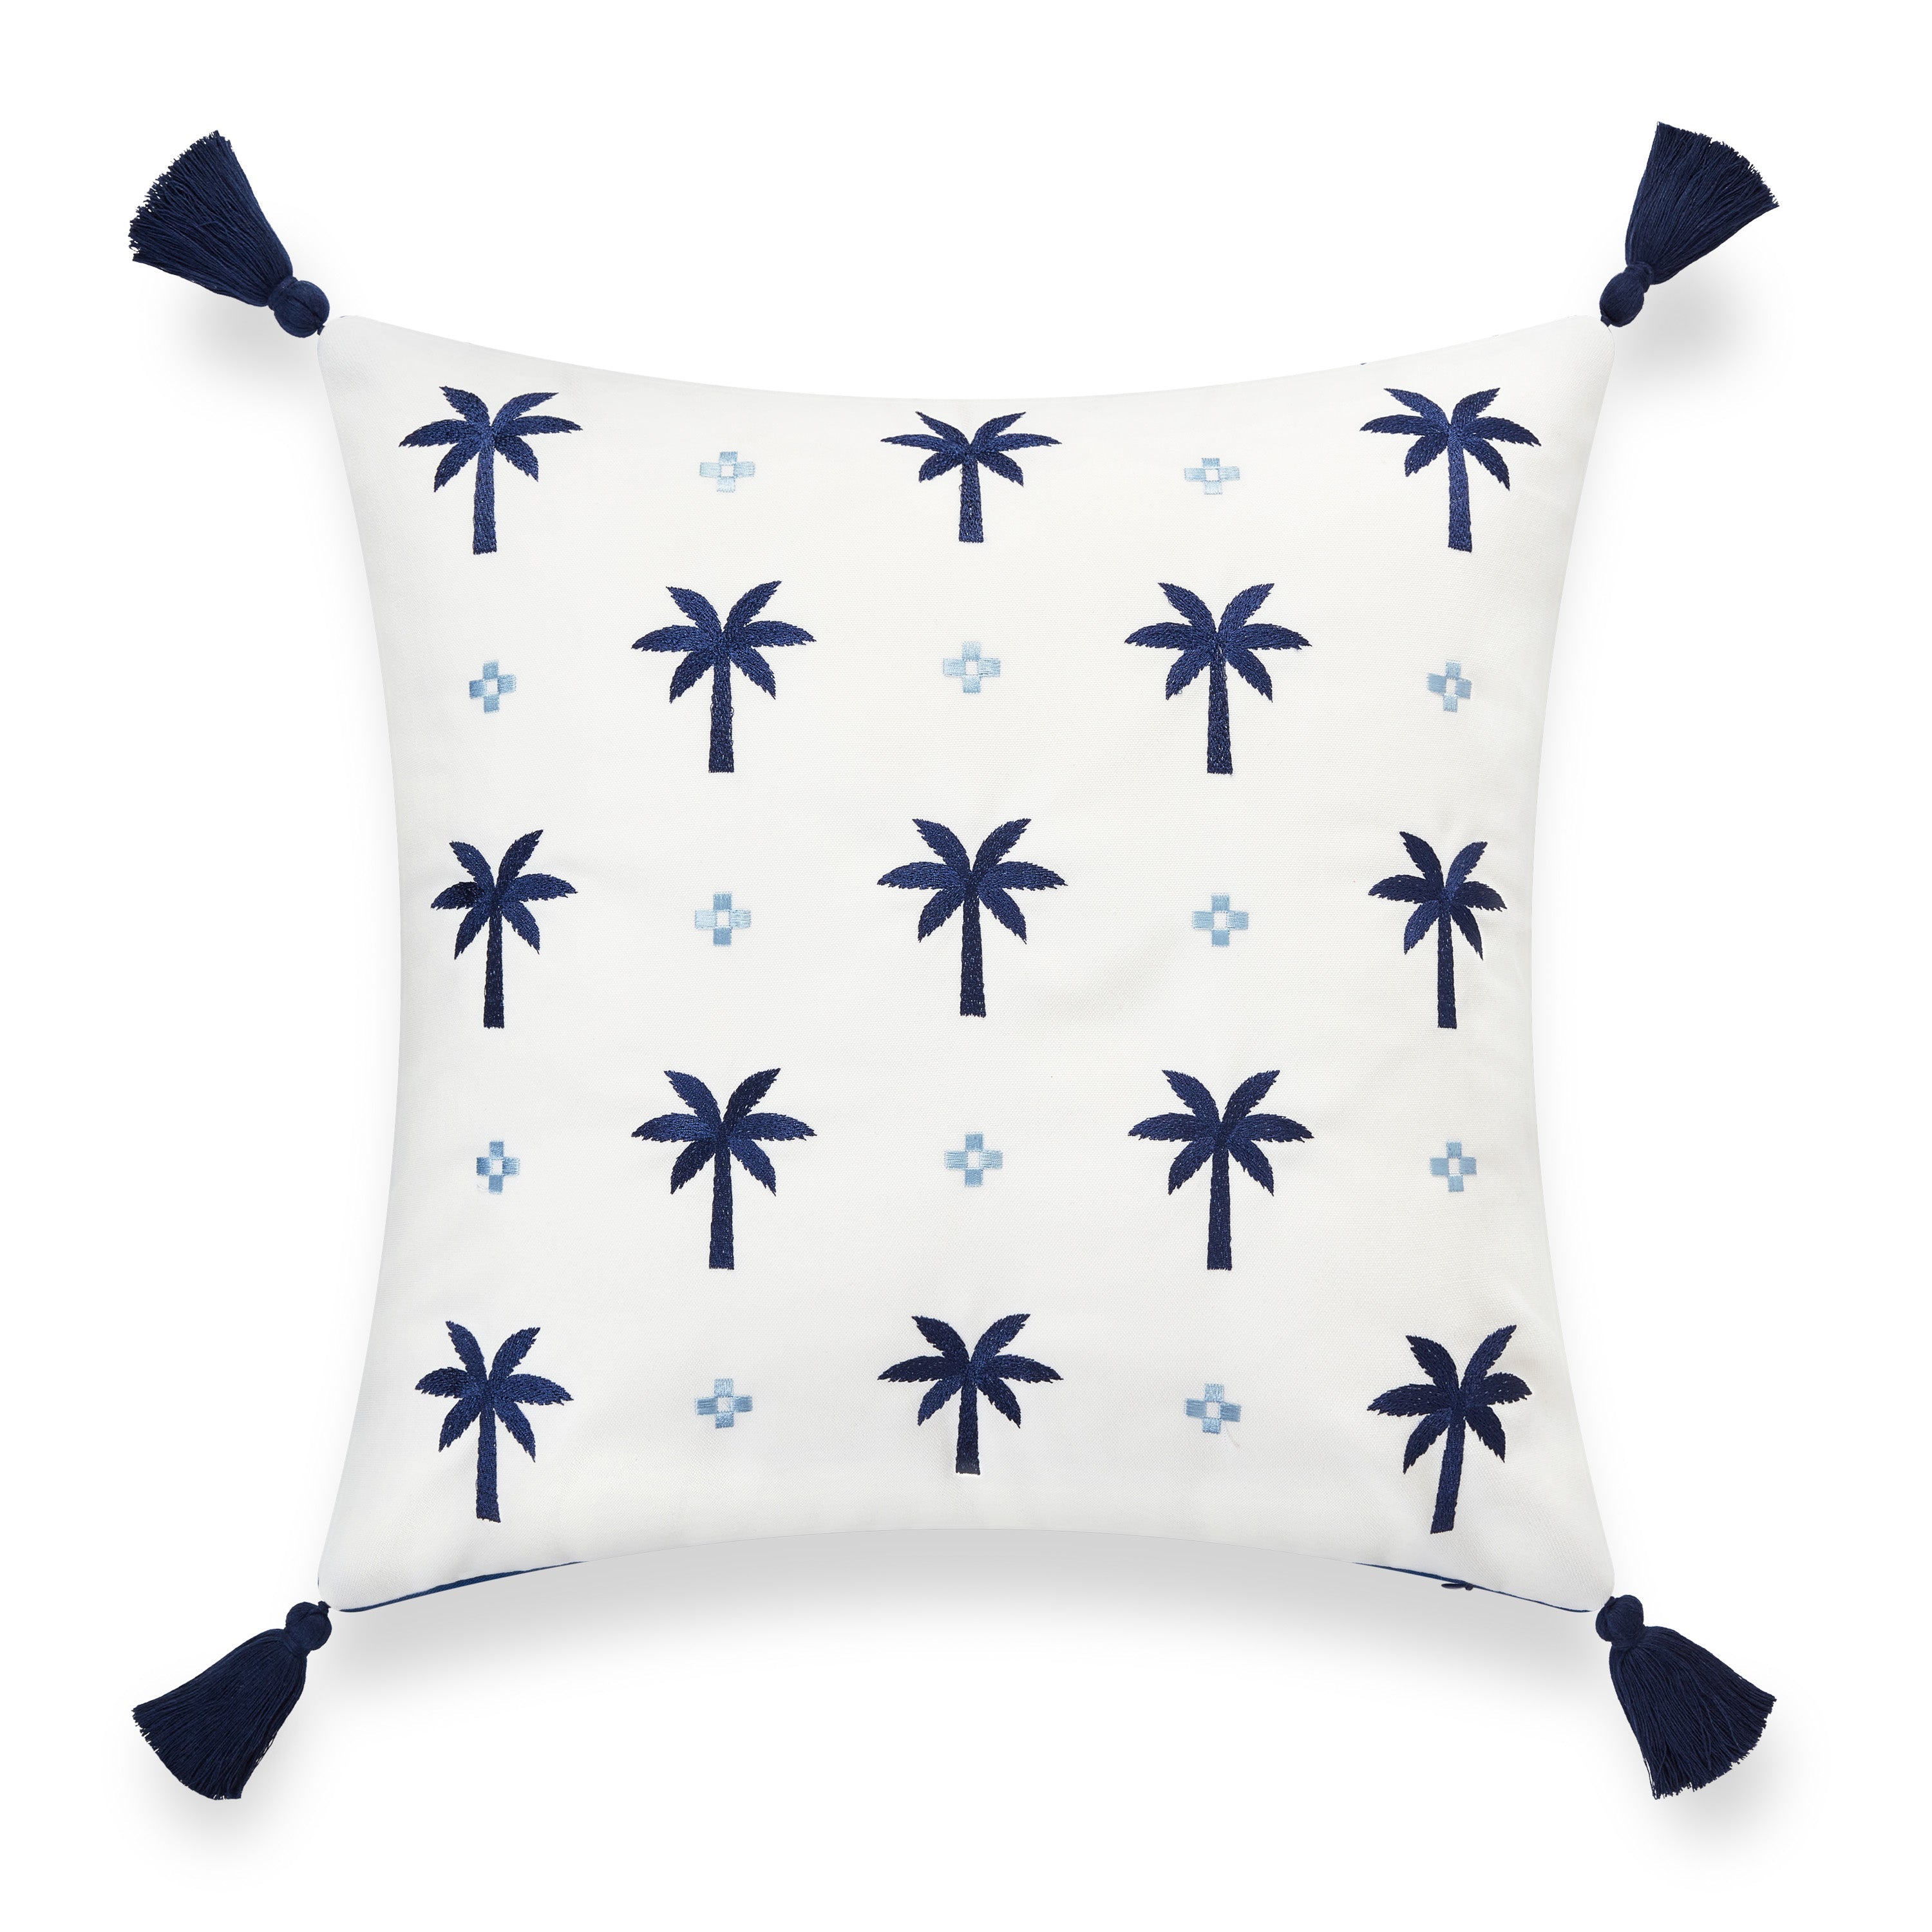 Coastal Hampton Style Indoor Outdoor Pillow Cover, Embroidered Palm Tree Tassel, Navy Blue Baby, 20"x20"